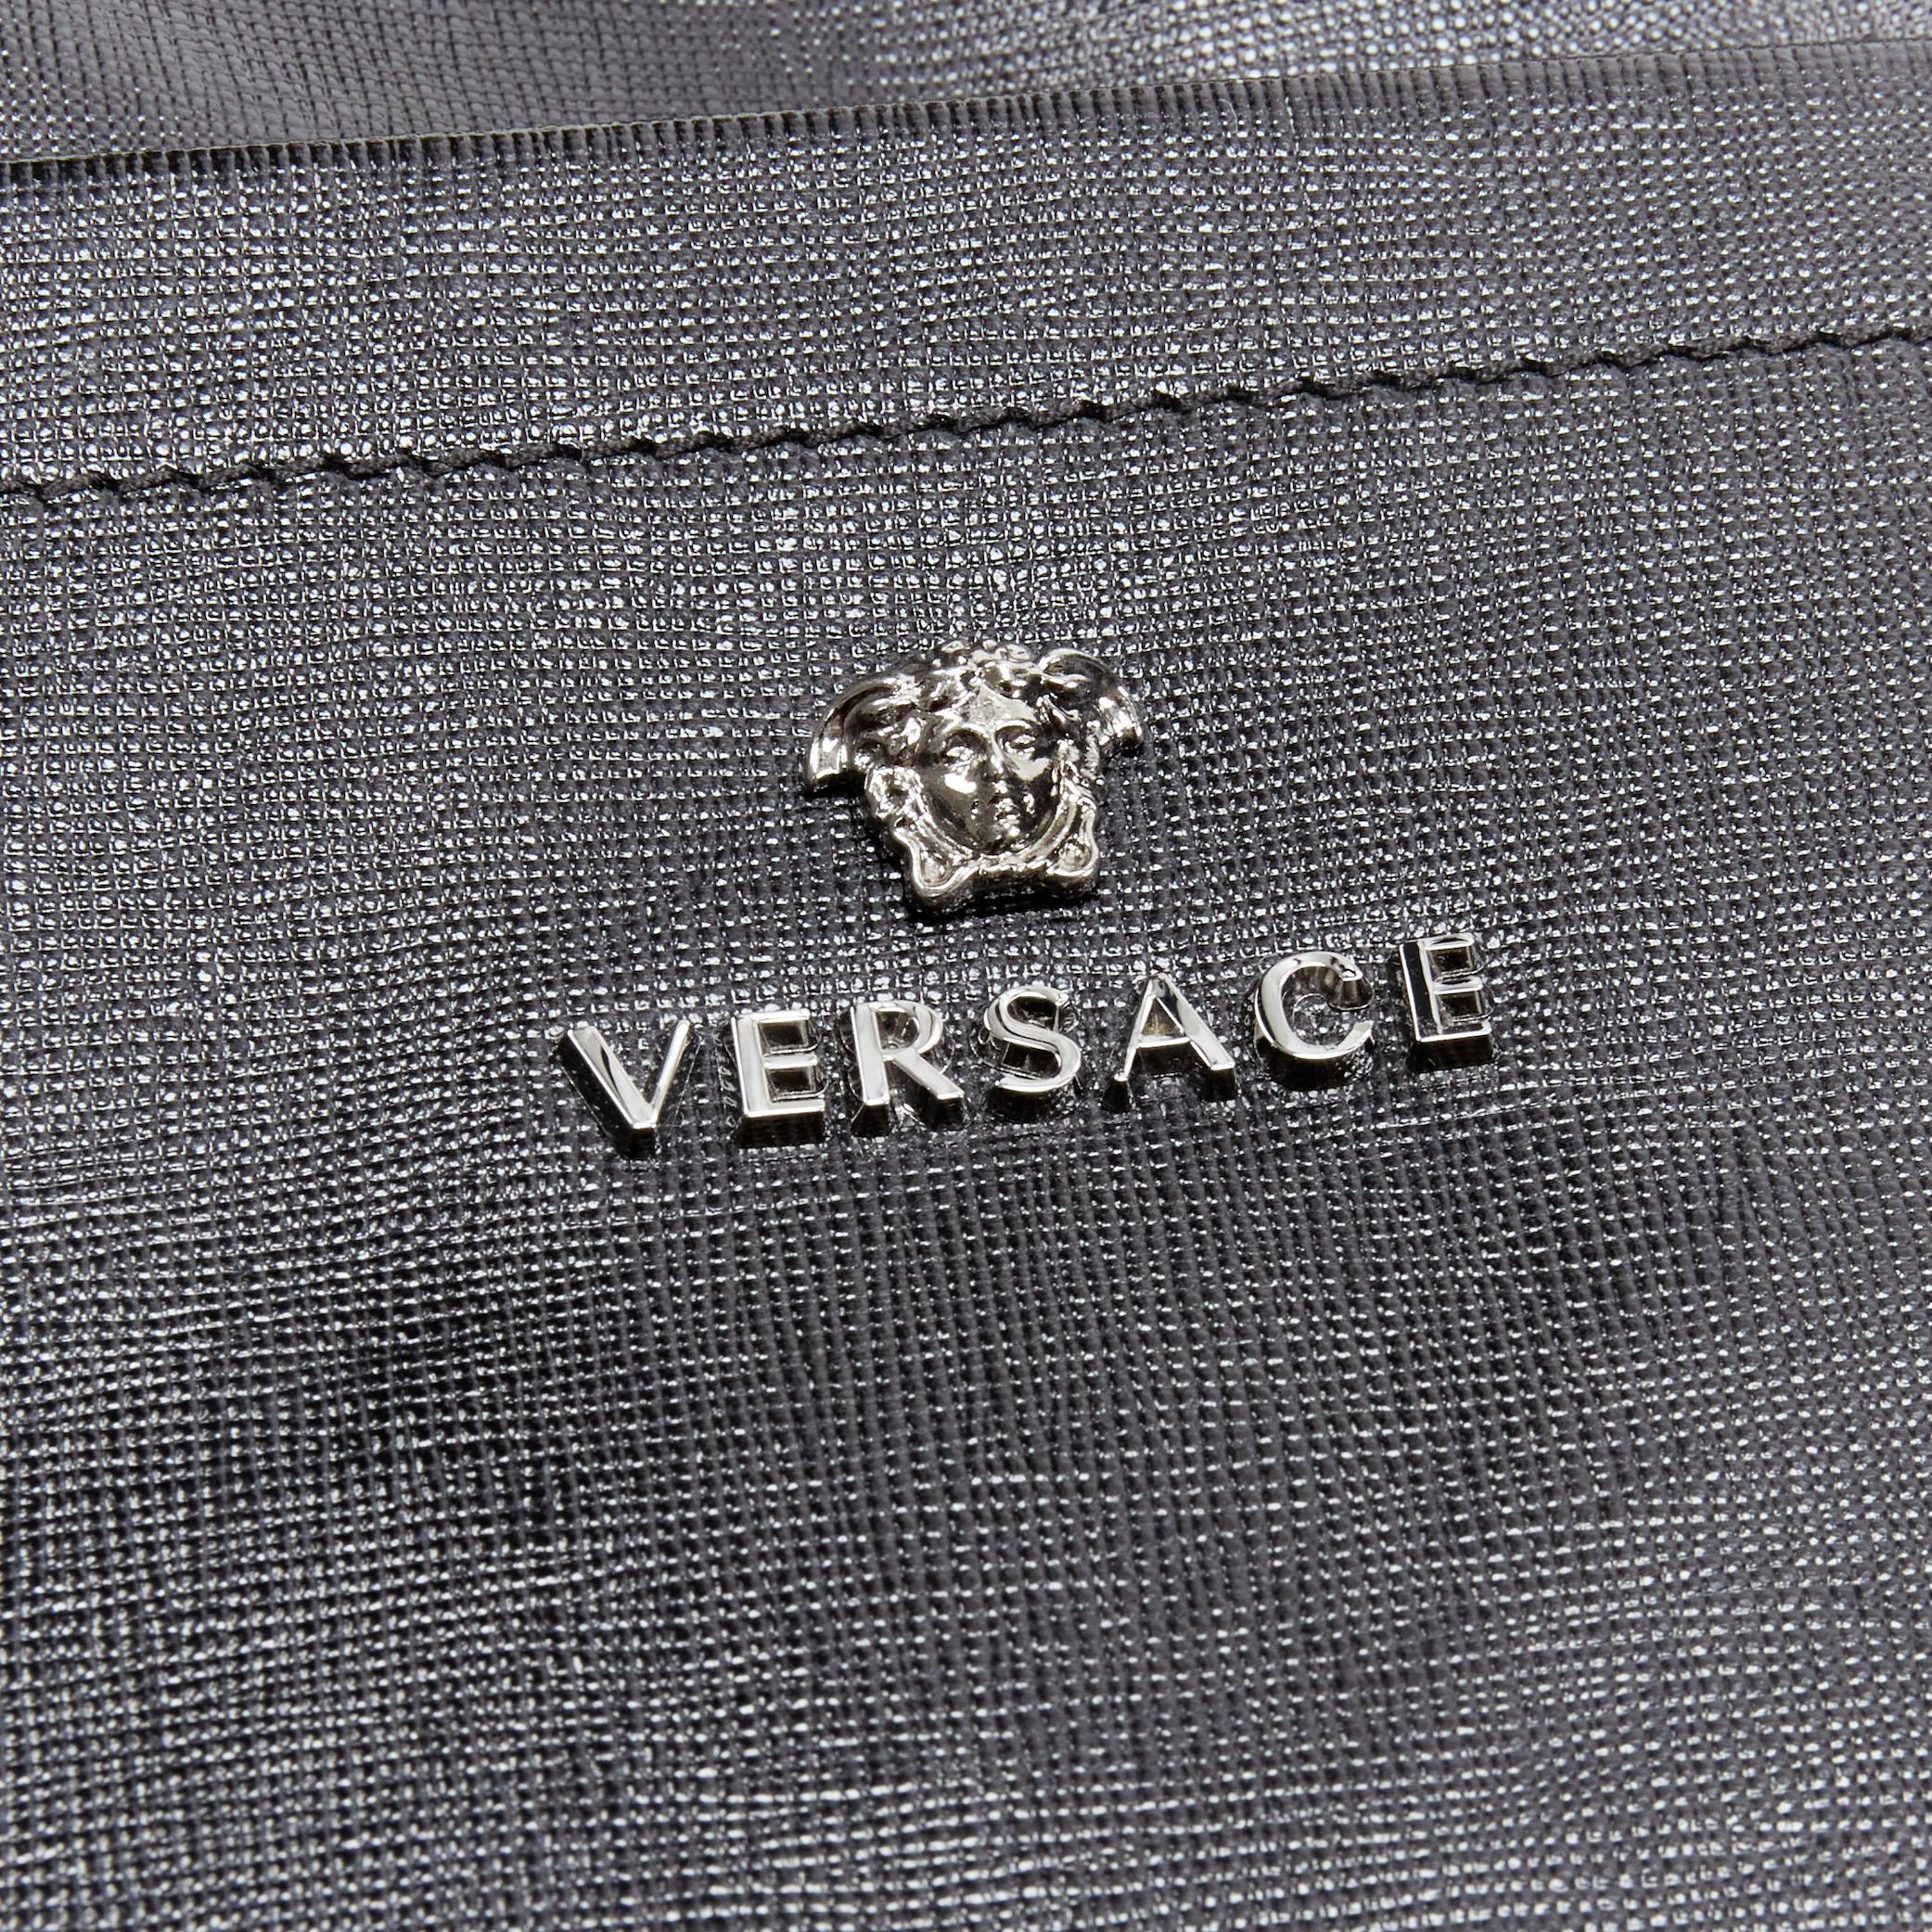 new VERSACE black lacquered saffiano leather silver Medusa messenger bag 2